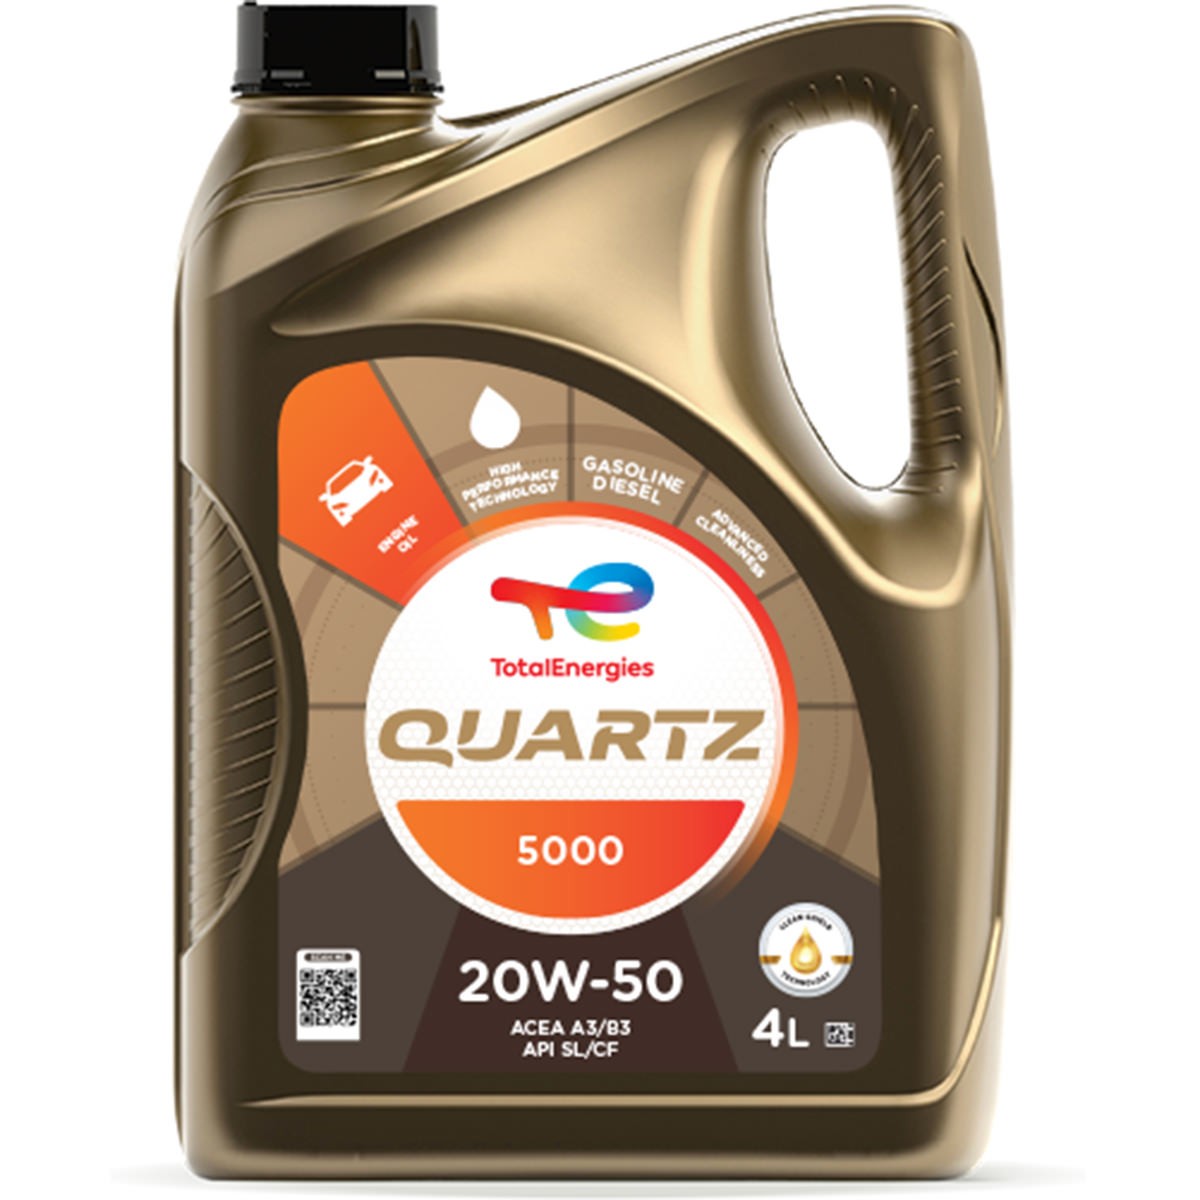 Great value for money - TOTAL Engine oil 213672